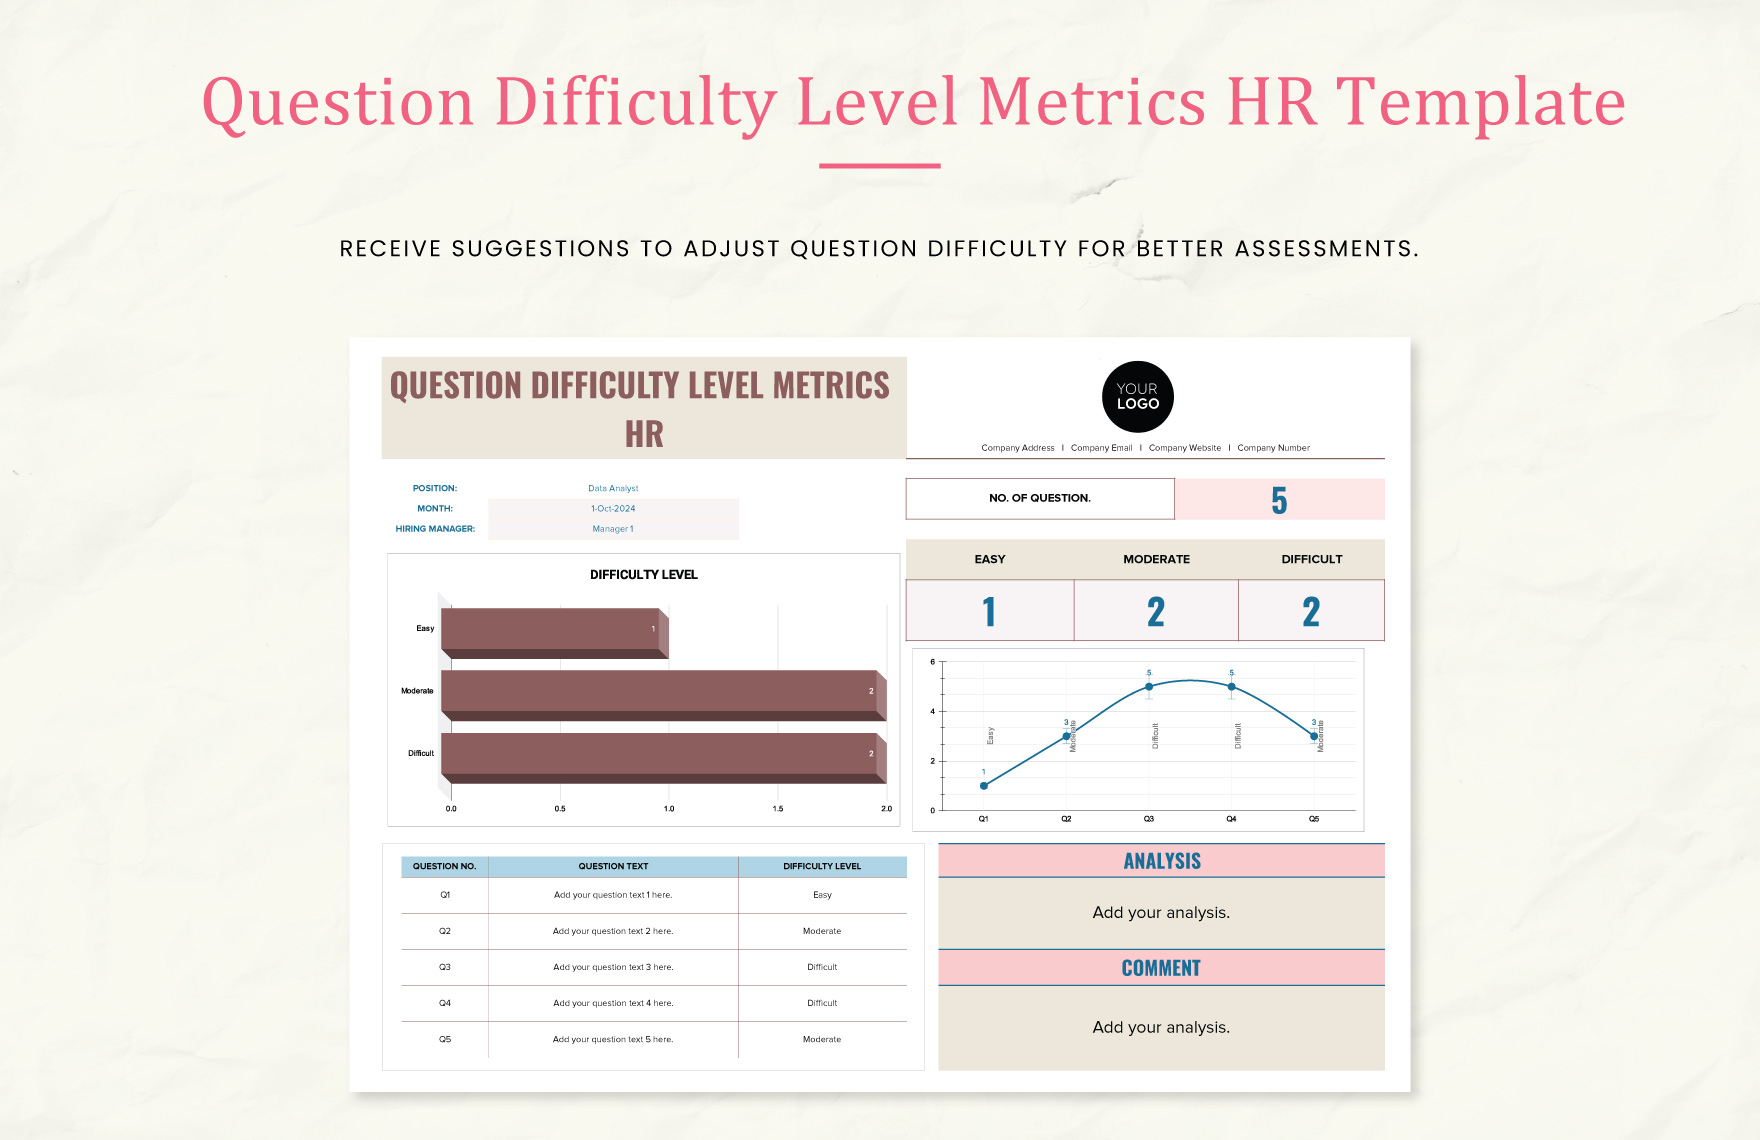 Question Difficulty Level Metrics HR Template